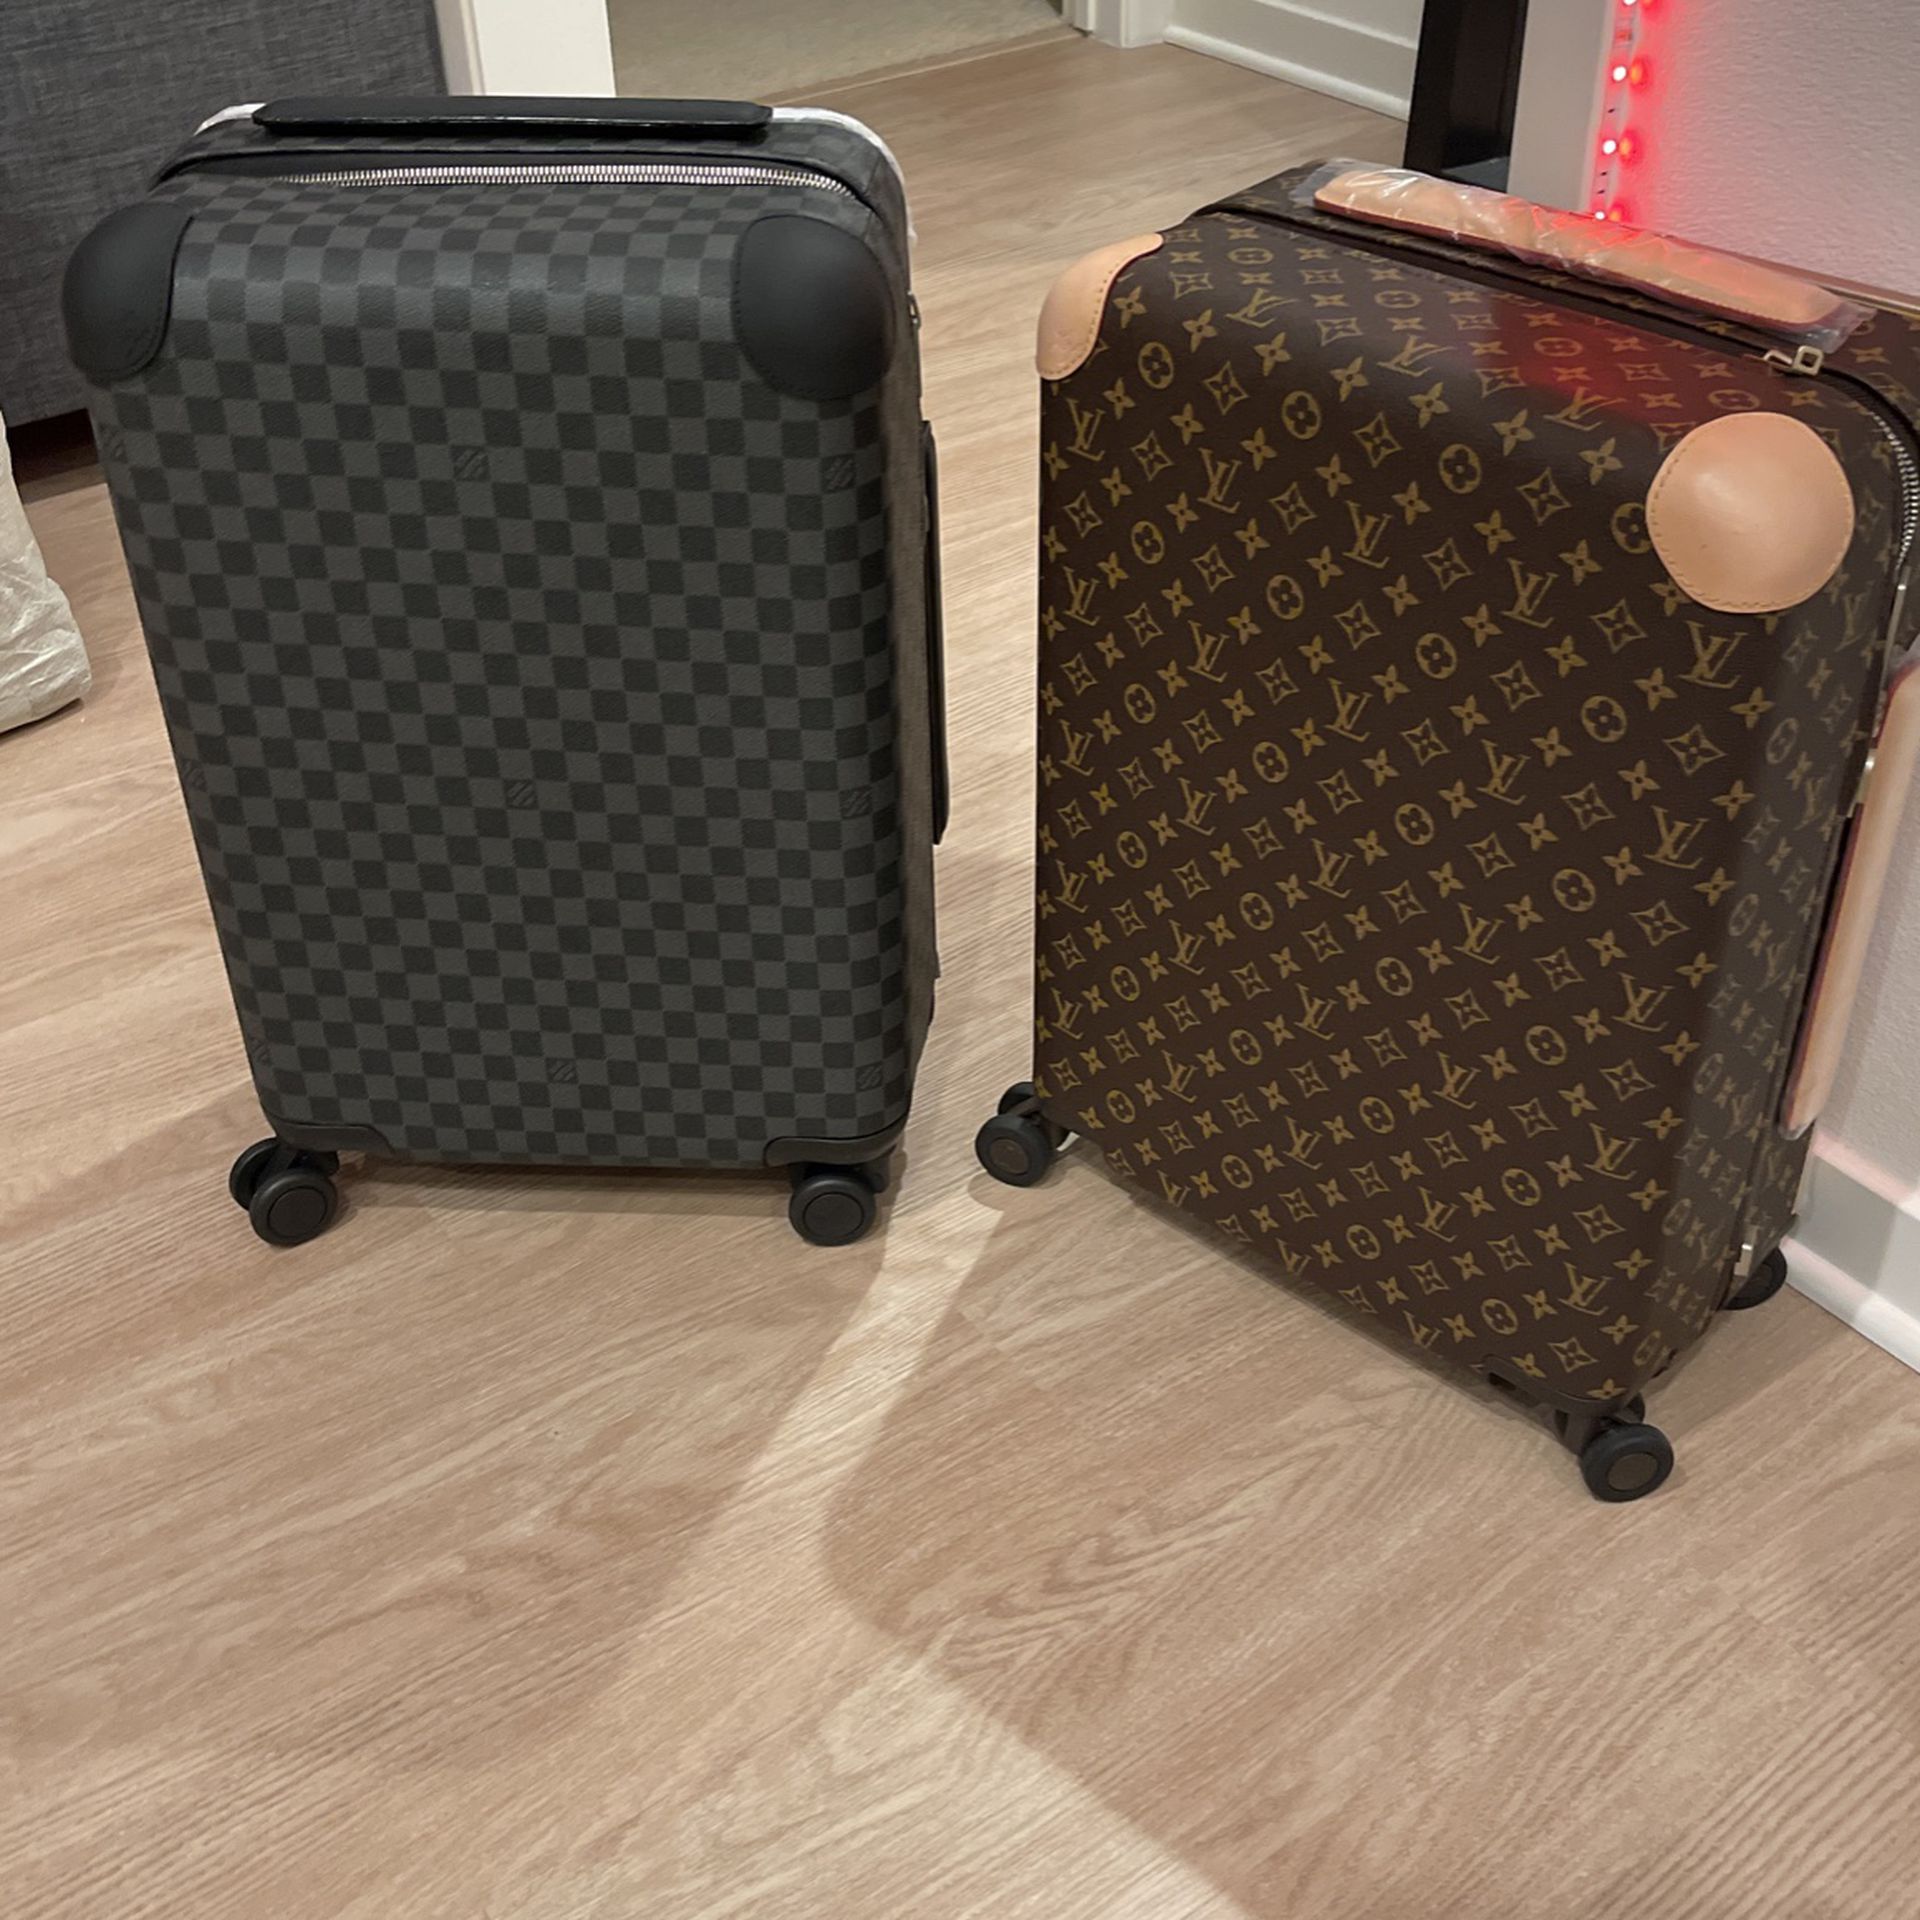 Louis Vuitton luggage for Sale in Irvine, CA - OfferUp